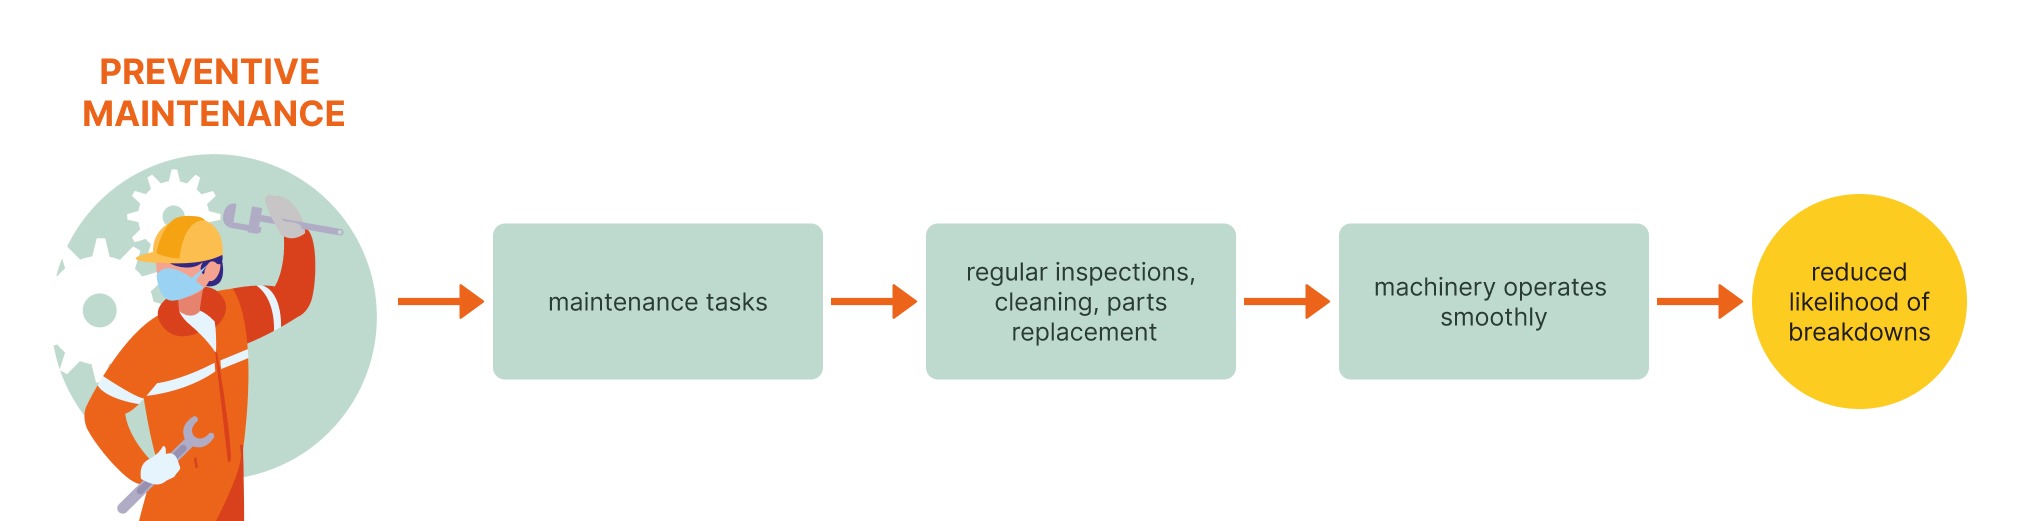 Flow chart showing results of preventive maintenance